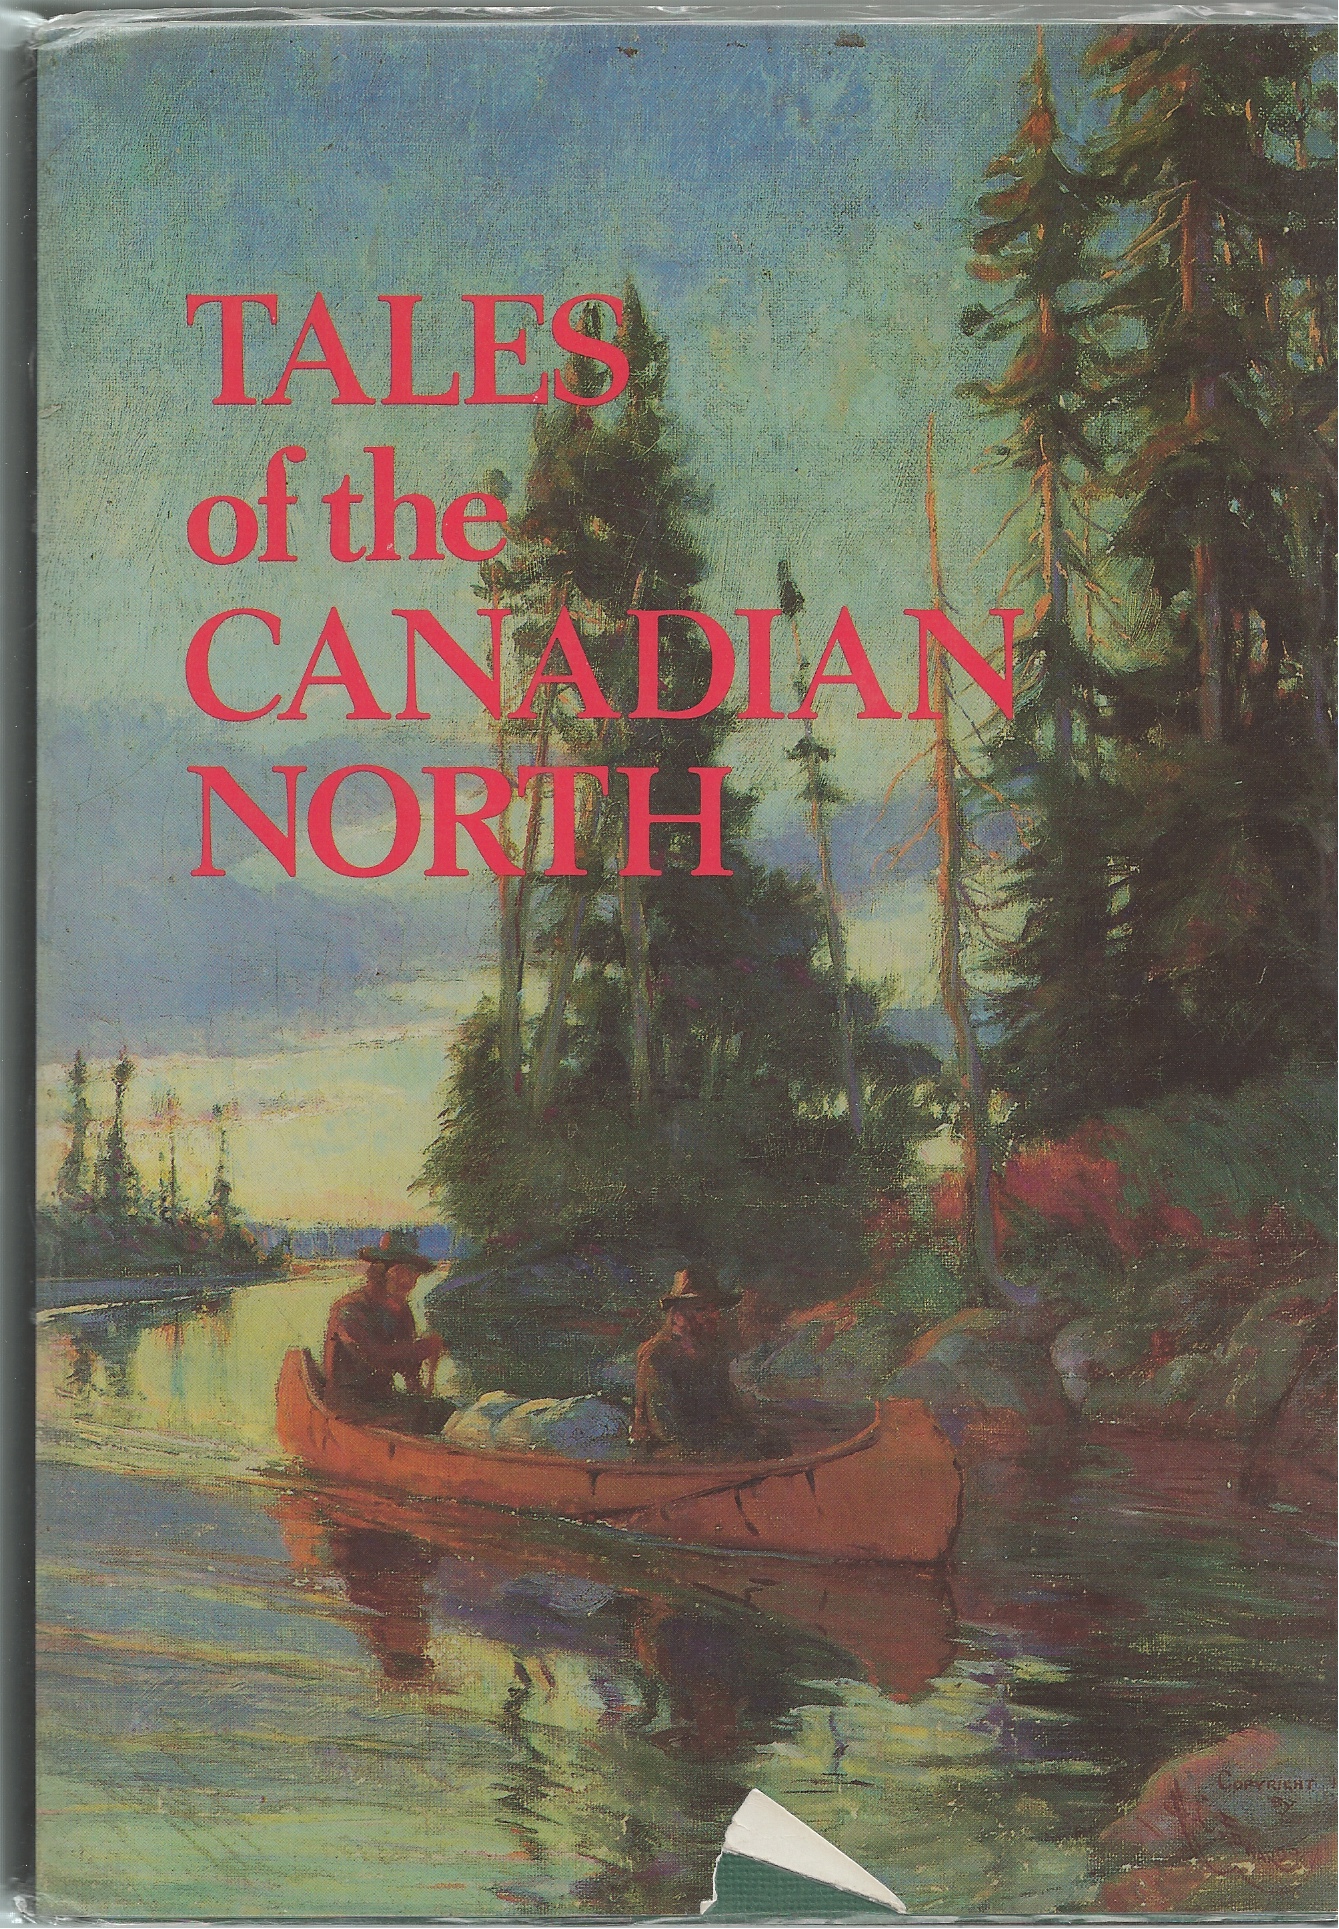 OPPEL FRANK (COMPILER) - Tales of the Canadian North